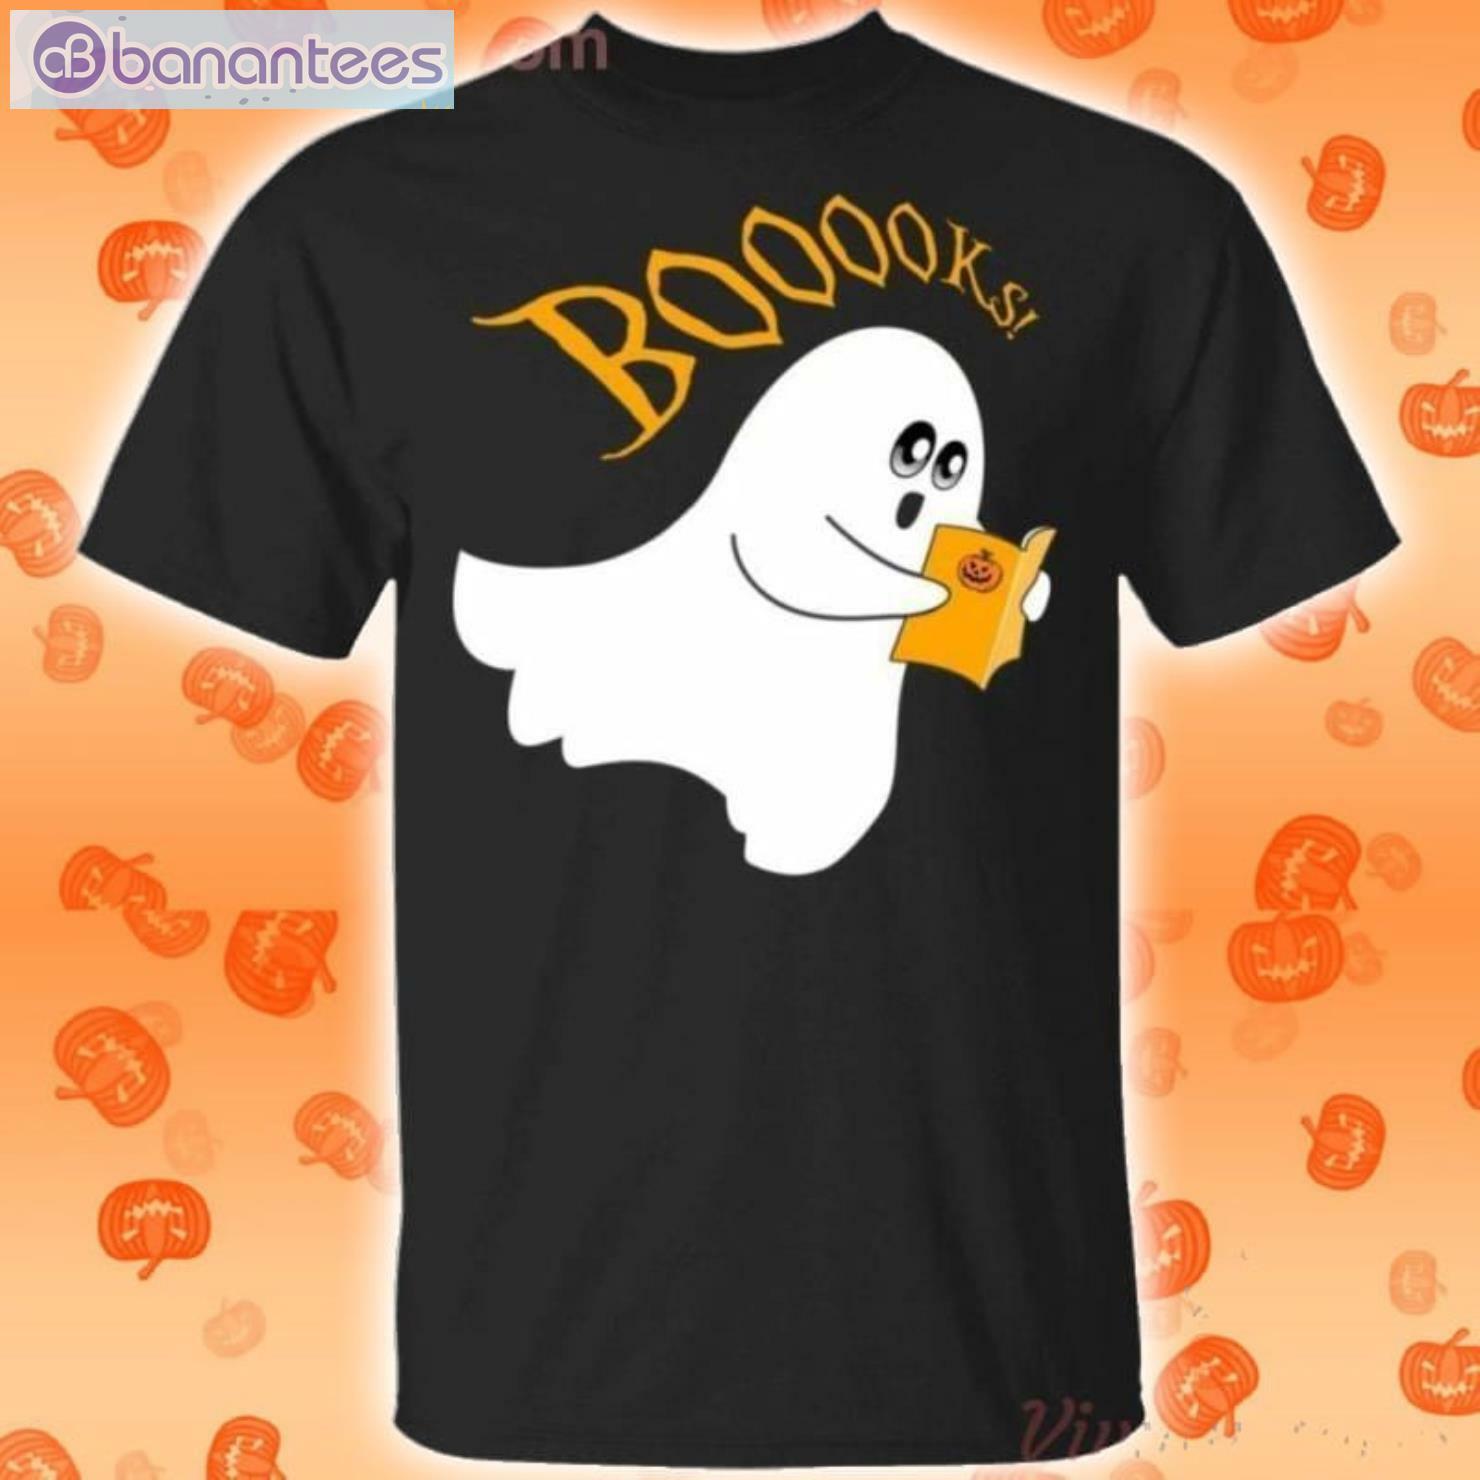 Ghost Reading Books Funny Halloween T-Shirt Product Photo 1 Product photo 1